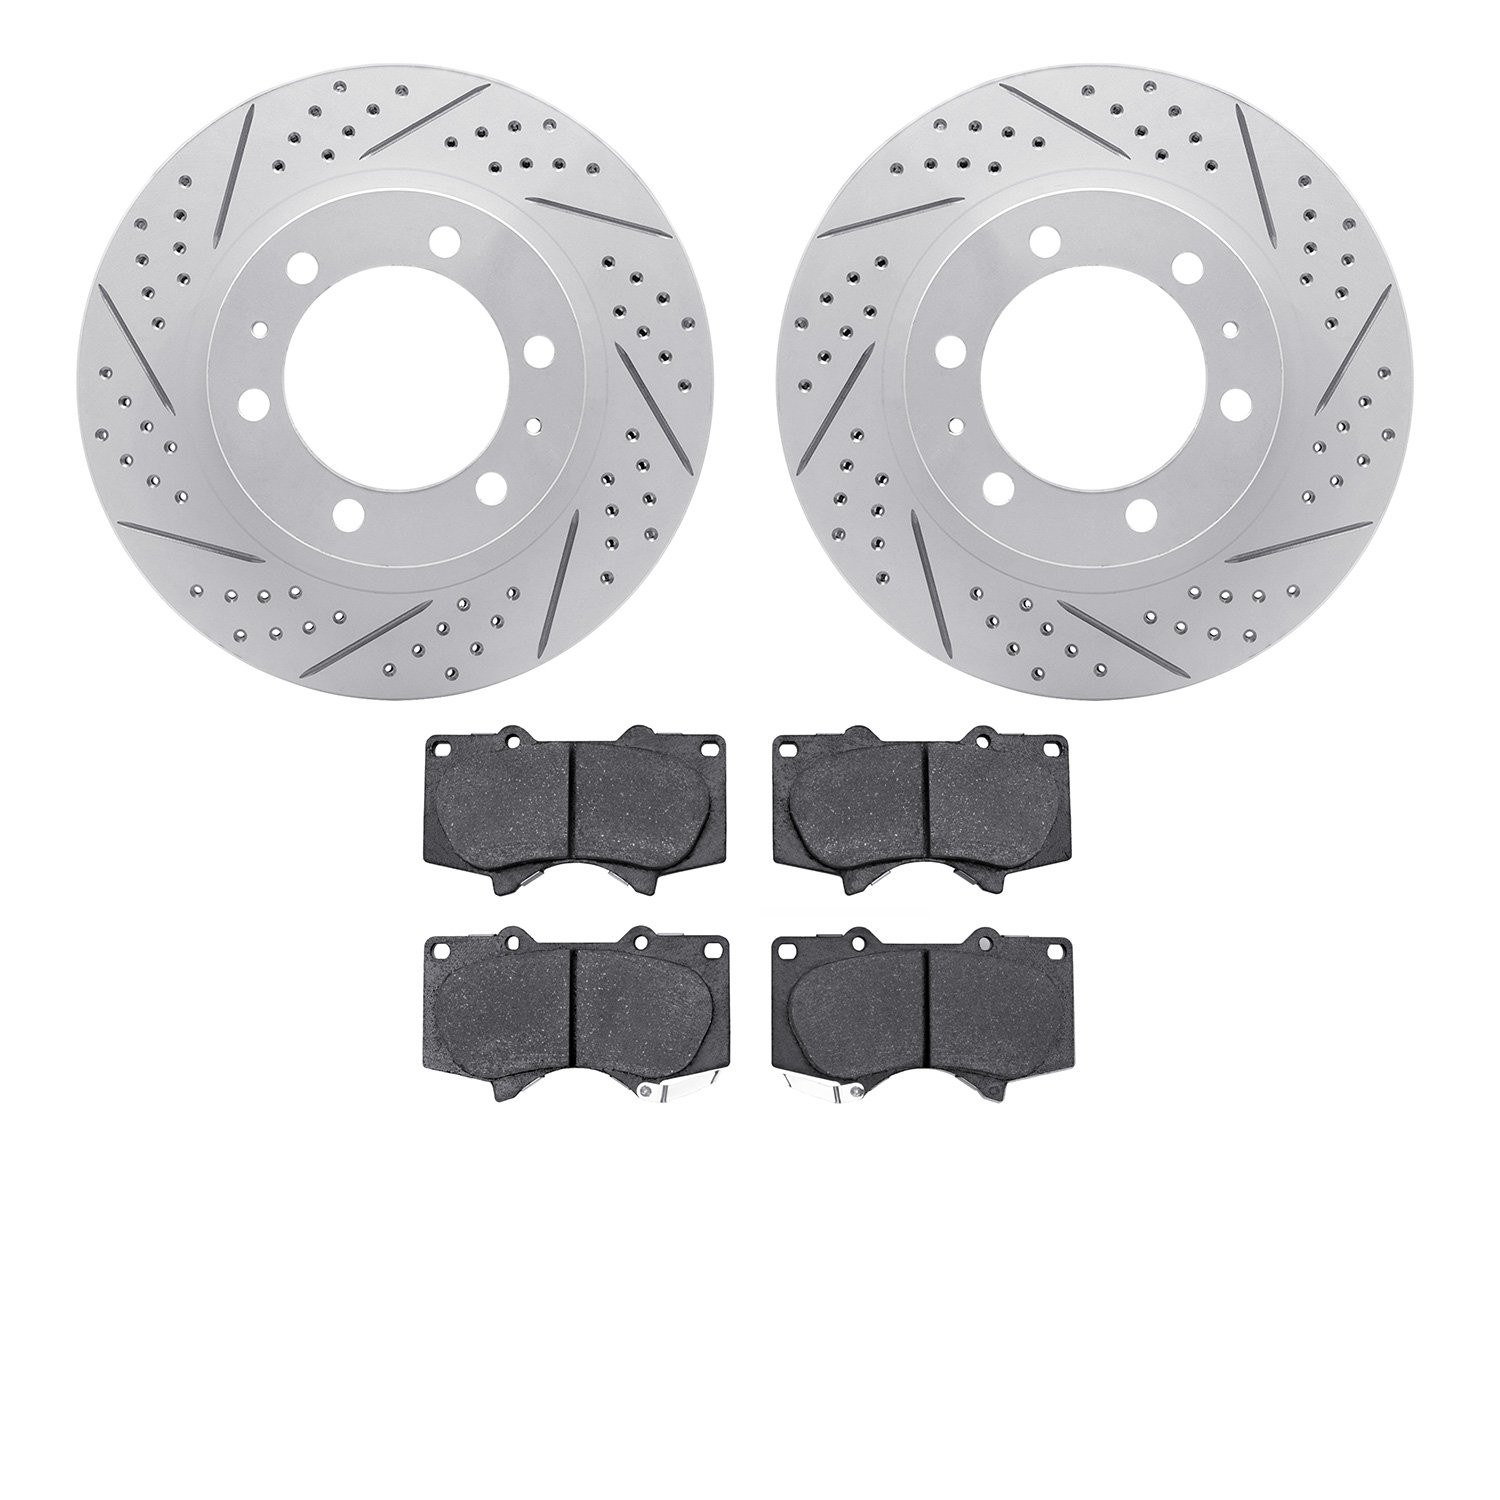 2402-76011 Geoperformance Drilled/Slotted Brake Rotors with Ultimate-Duty Brake Pads Kit, Fits Select Lexus/Toyota/Scion, Positi